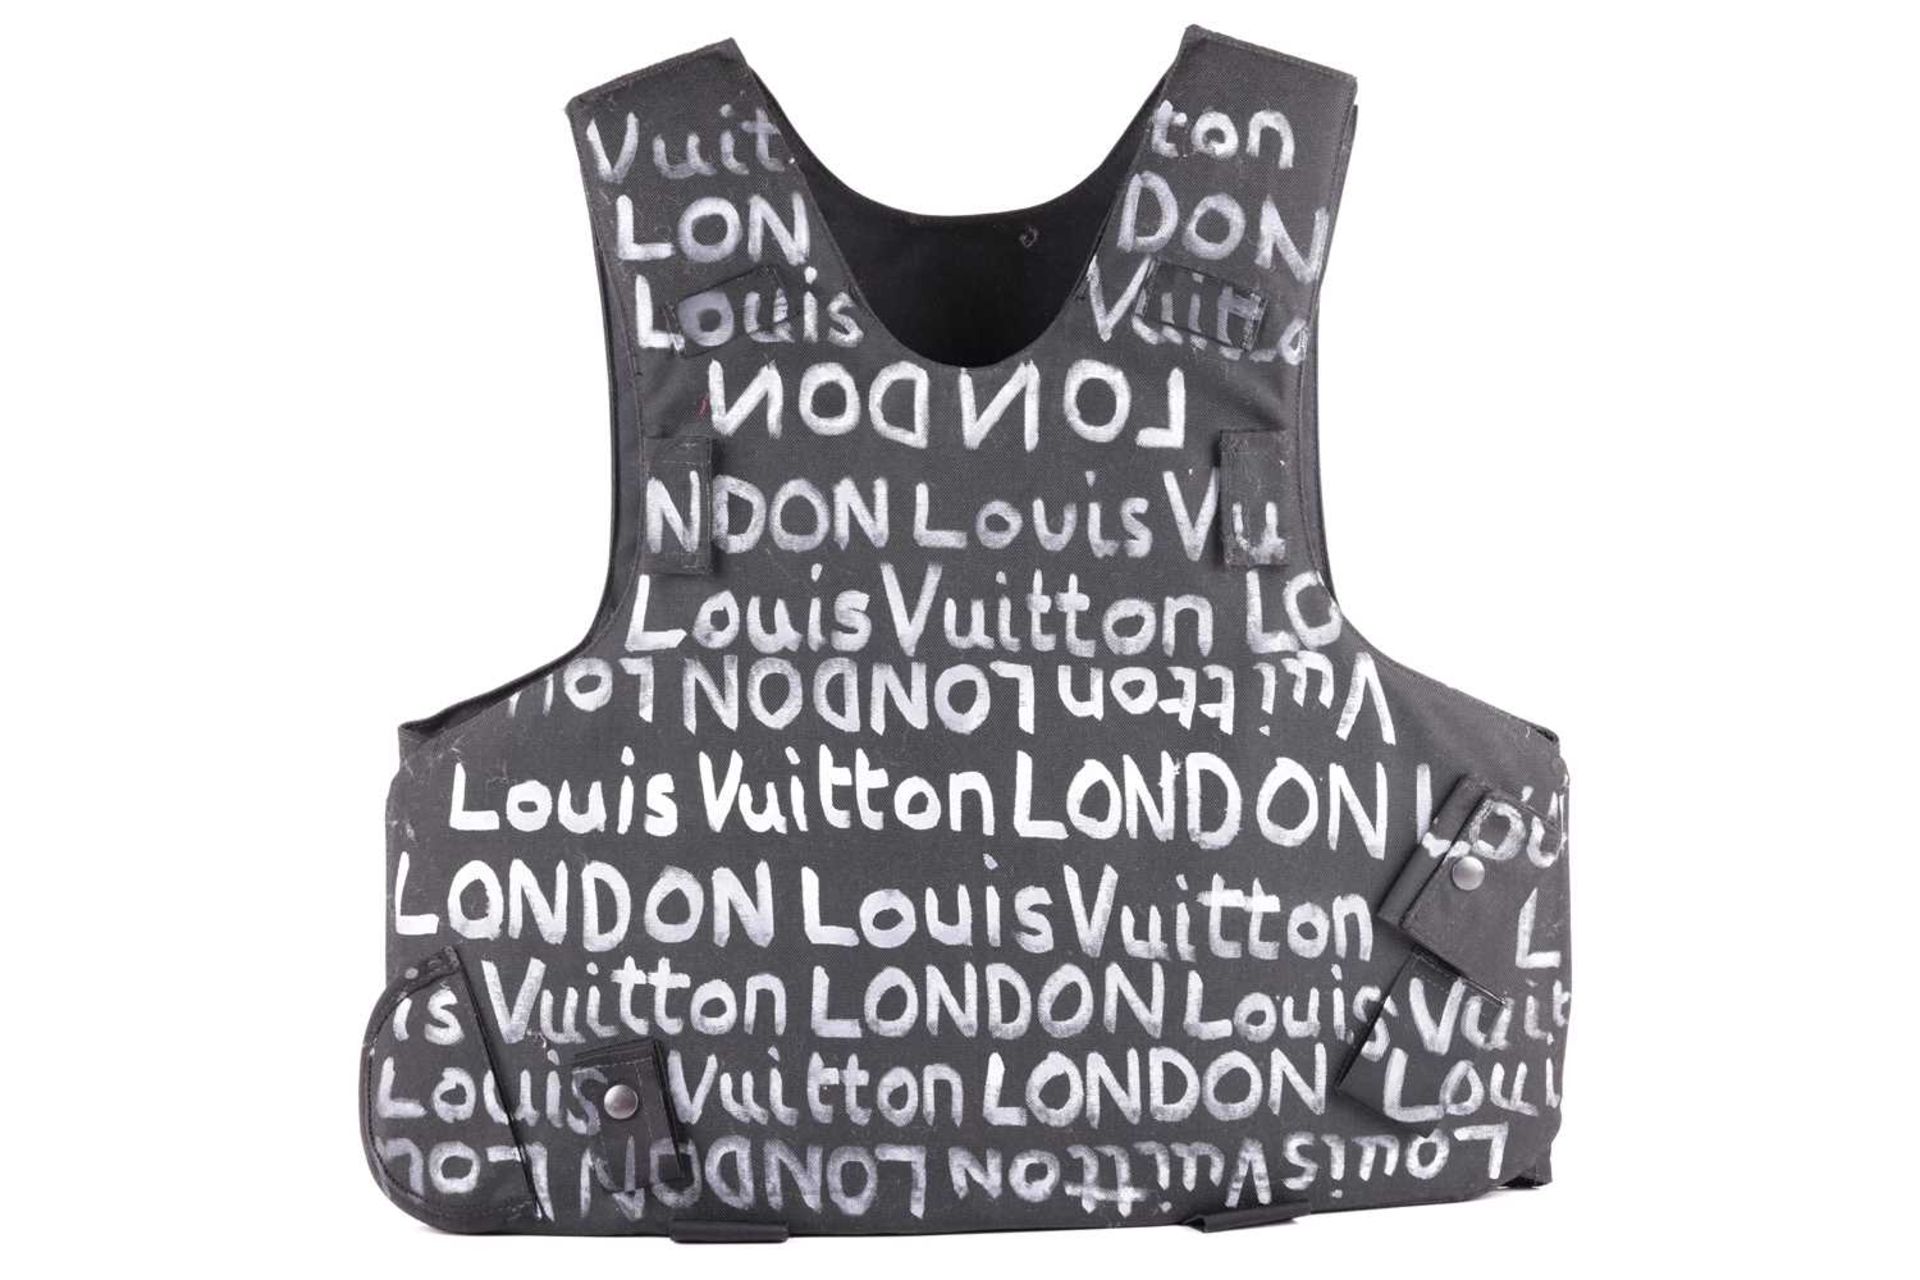 War Boutique (b. 1965), 'Louis Vuitton London', initialled, dated '19 and numbered 1/1 on interior